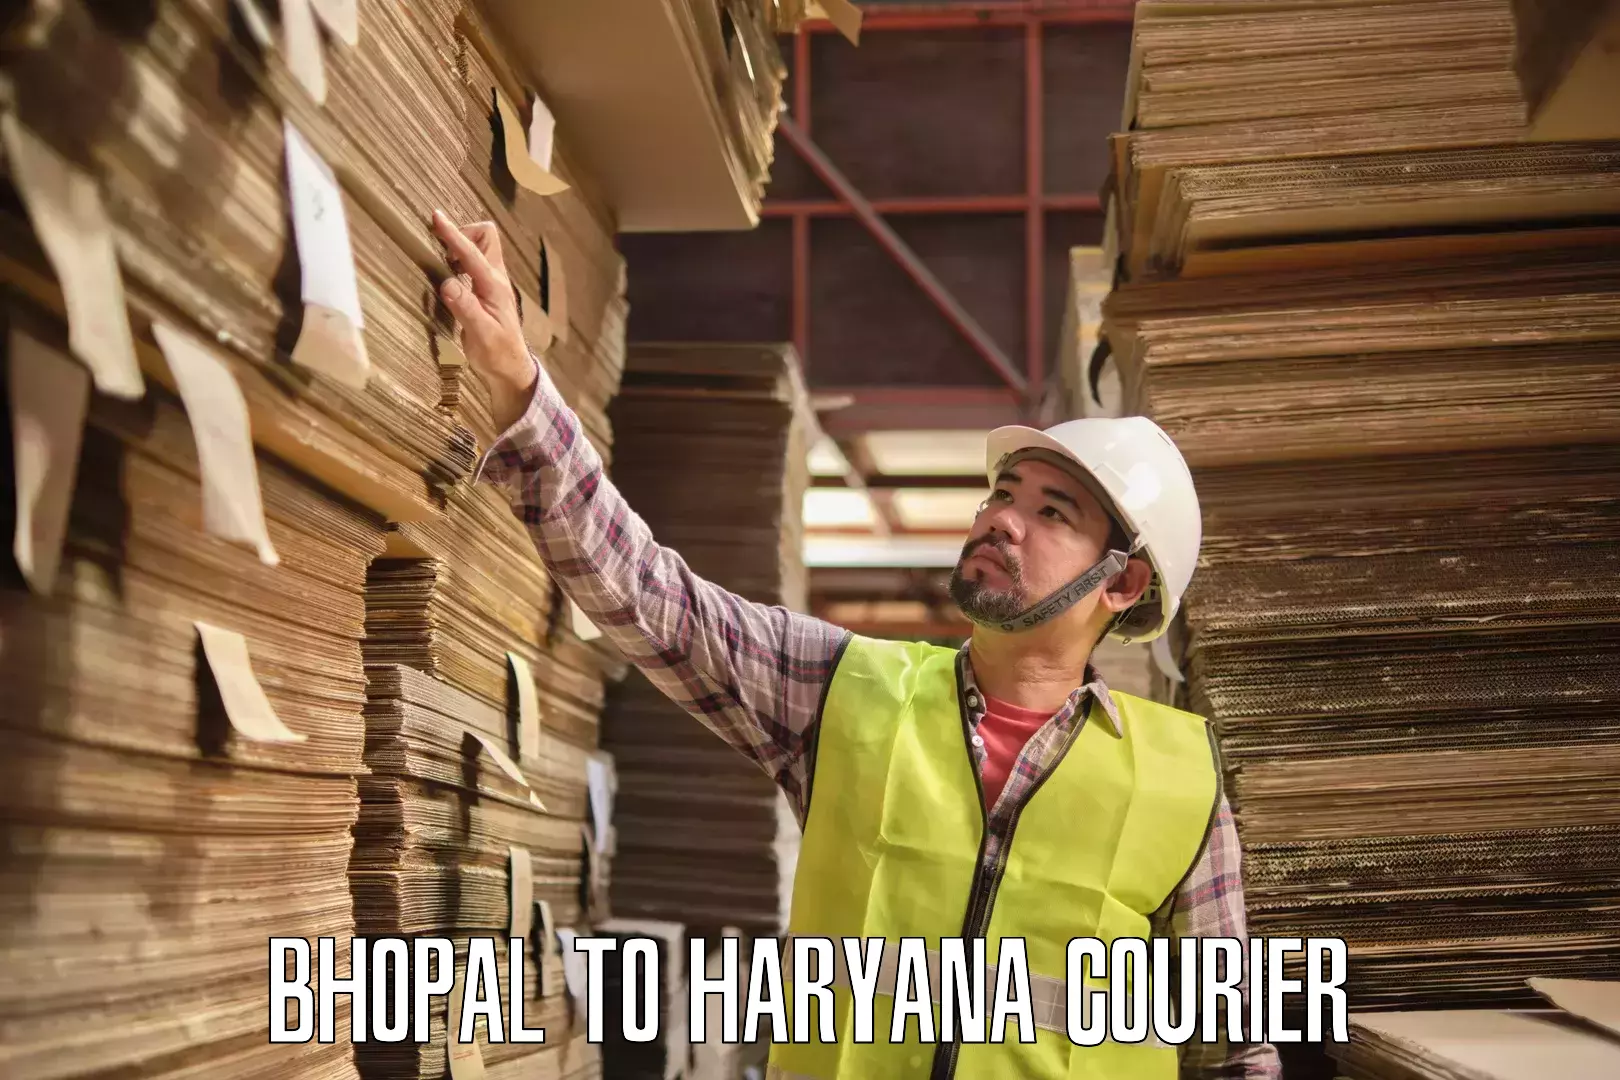 Professional courier handling Bhopal to Haryana